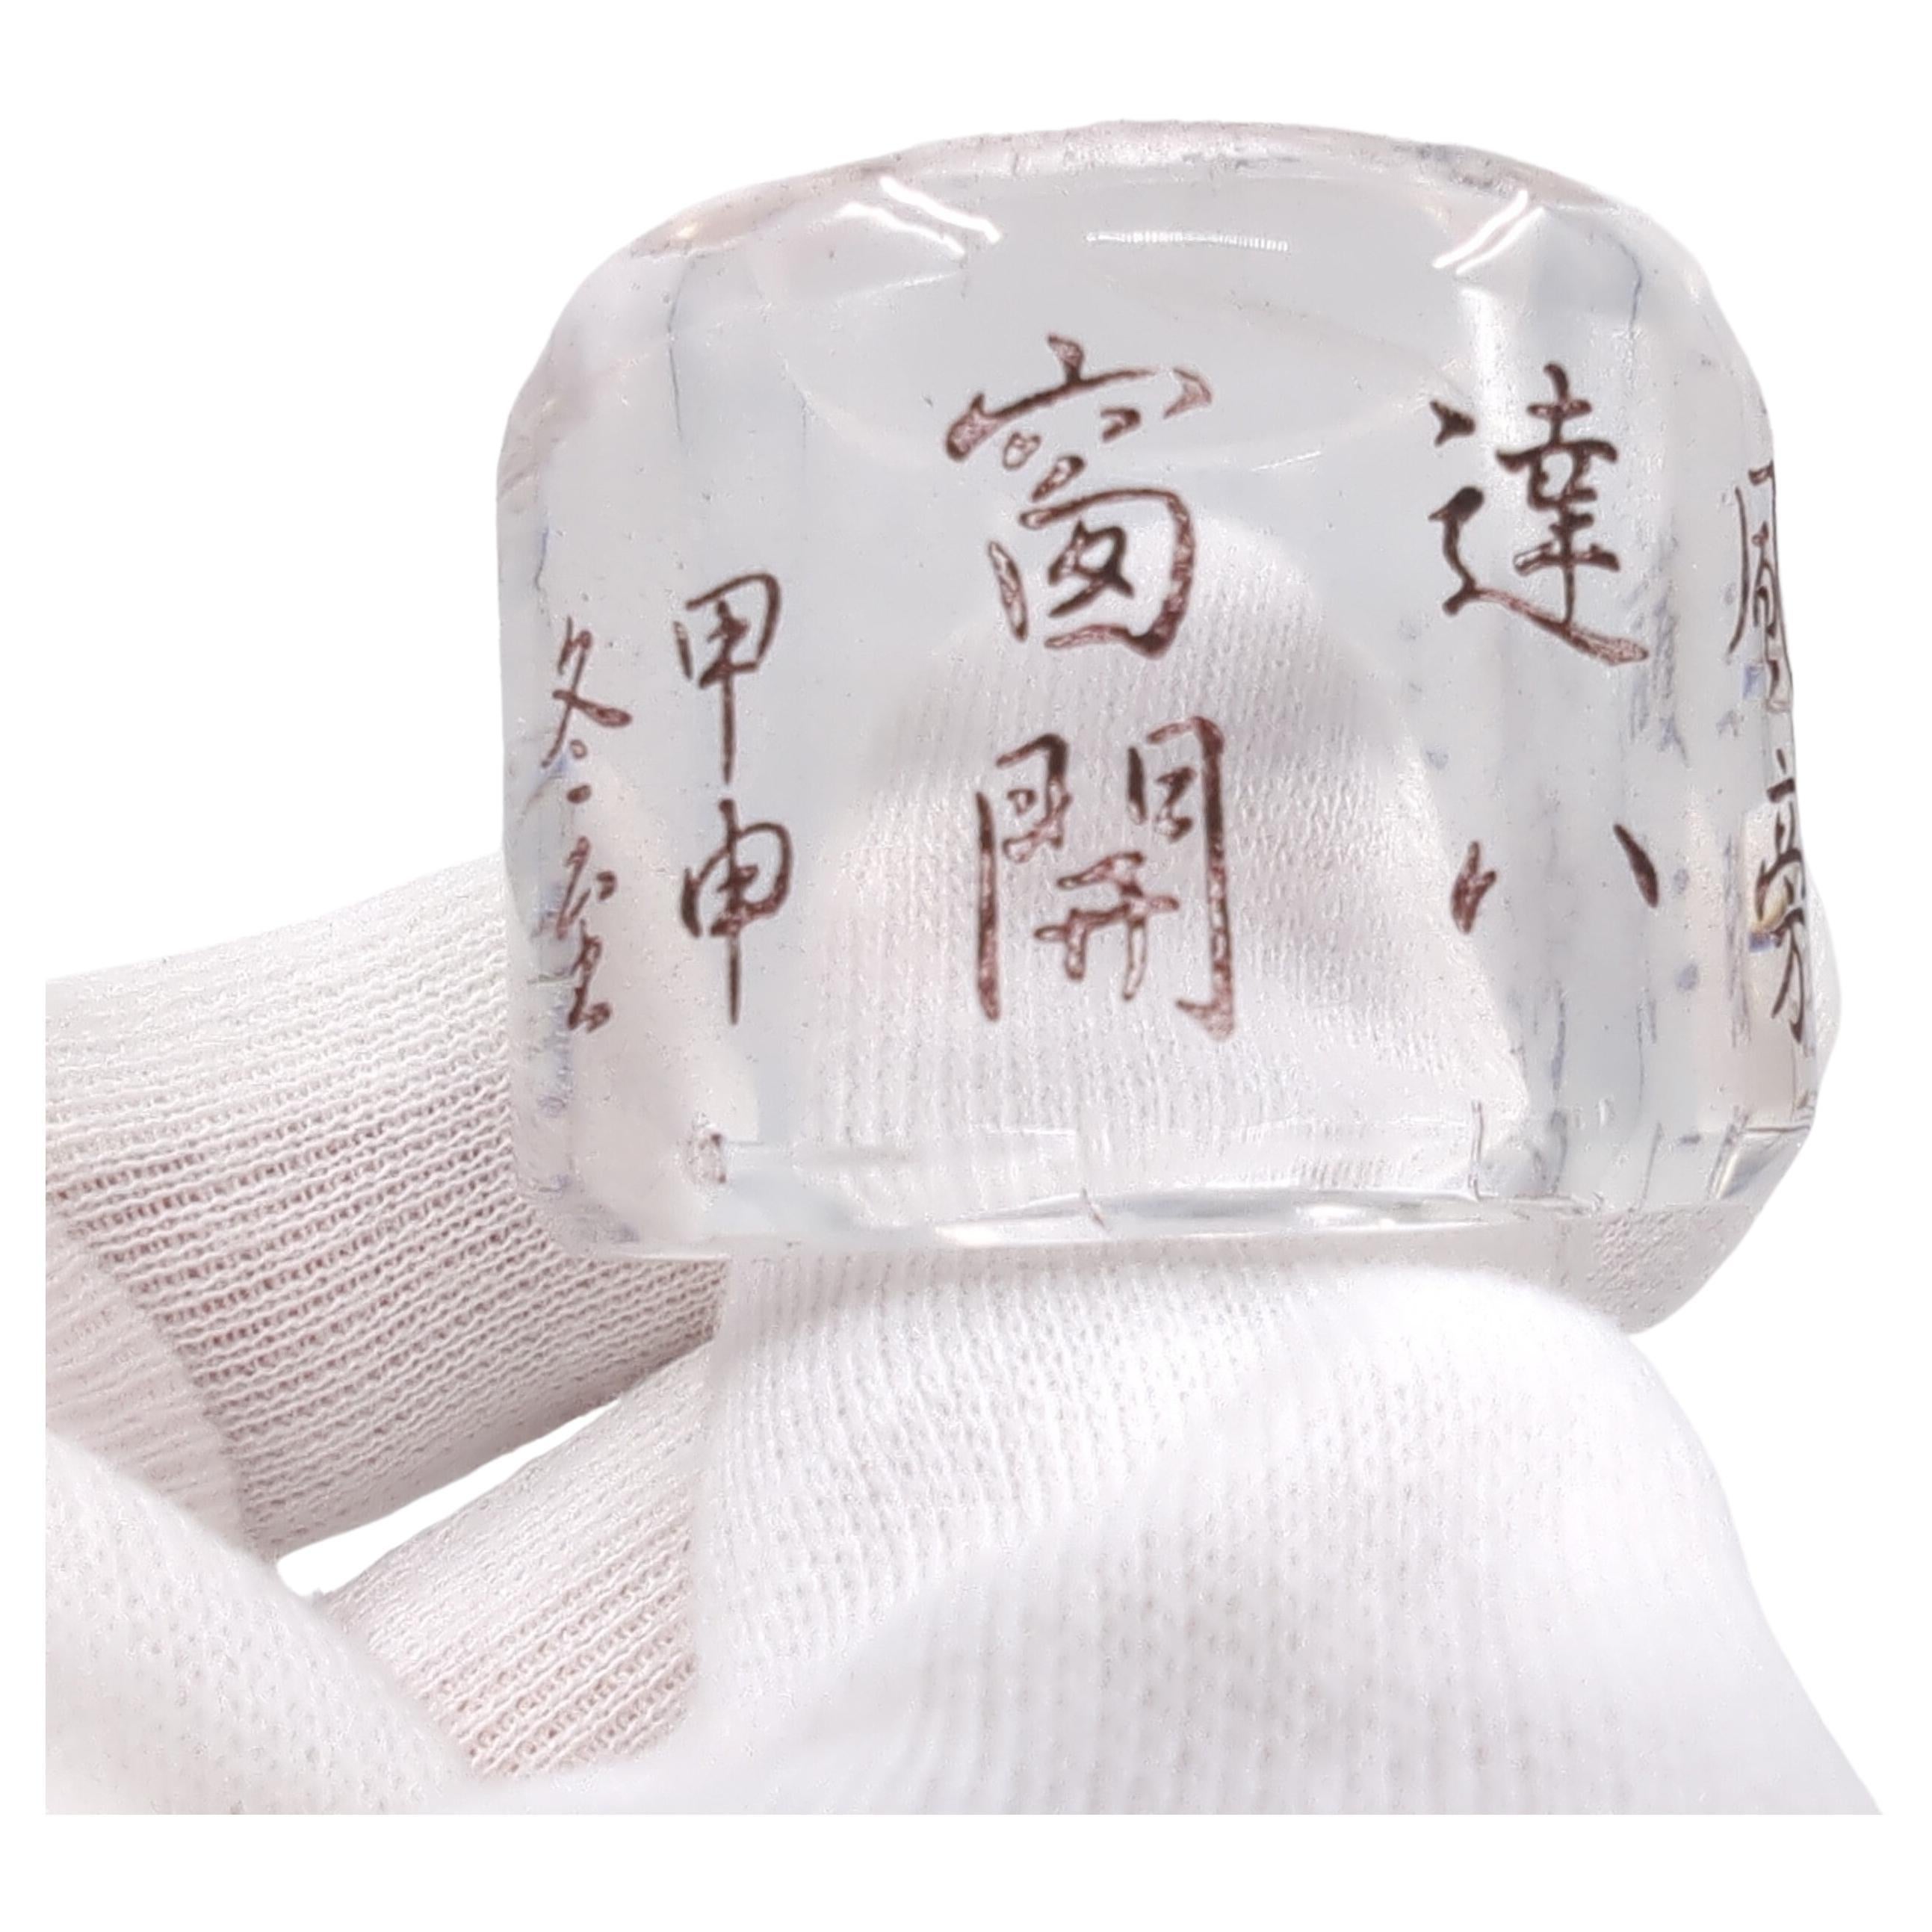 Very fine antique Chinese hand carve rock crystal archer's thumb ring, incised and ink filled with poetic verses in powerful script calligraphy 

Dated: 甲申 冬至 (likely 1824, Winter Day)

Size: US size 13.5
Height: 28 mm
Outer diameter: 39 mm
Inner